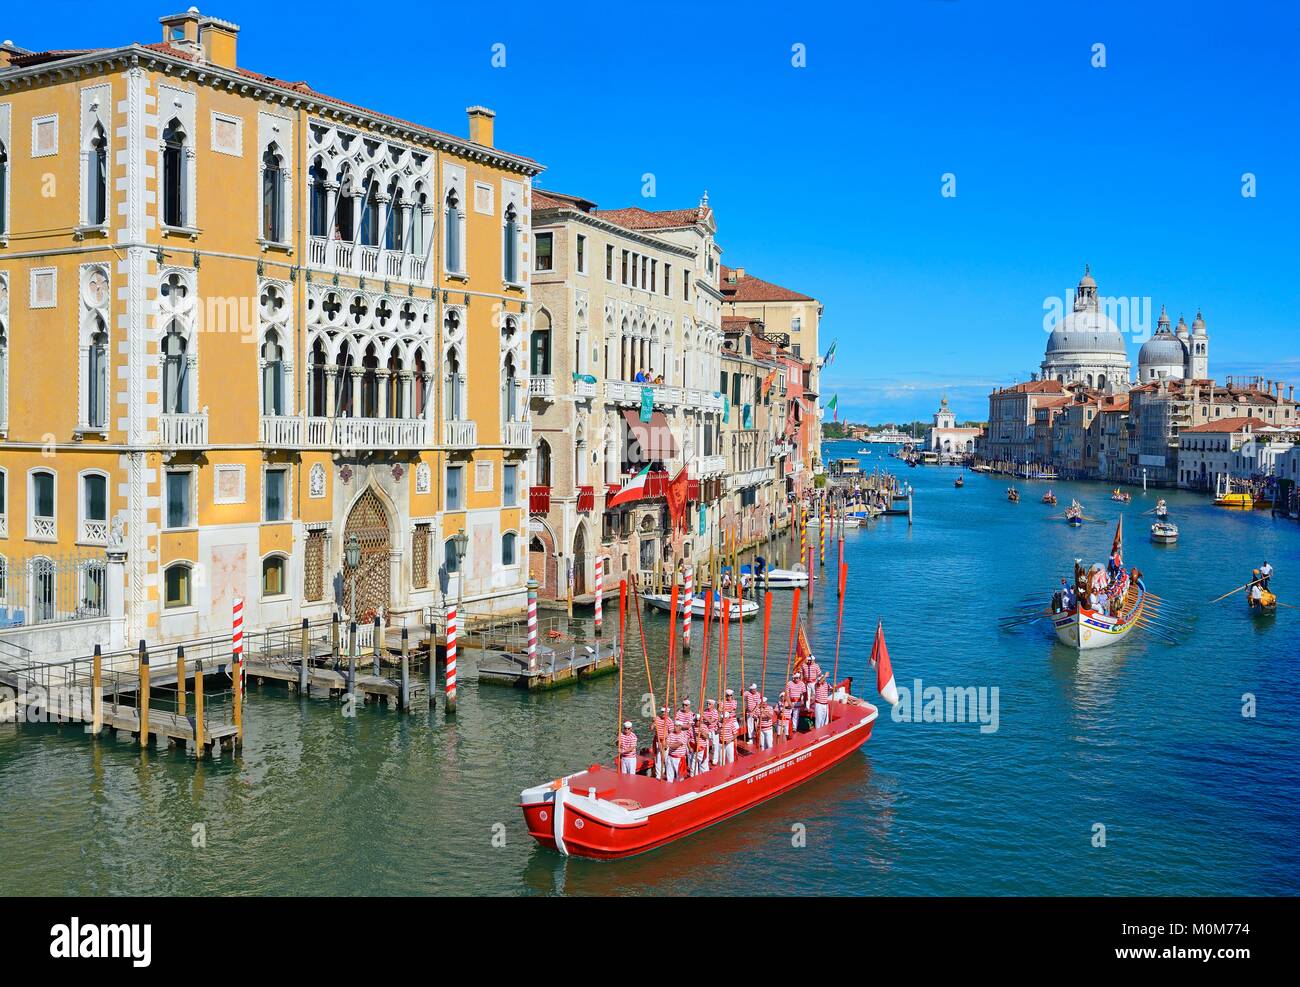 Italy,Veneto,Venice listed as World Heritage by UNESCO,the historical regatta on the Grand Canal with the Cavalli Franchetti palace on the left and Santa Maria Della Salute church in the background Stock Photo